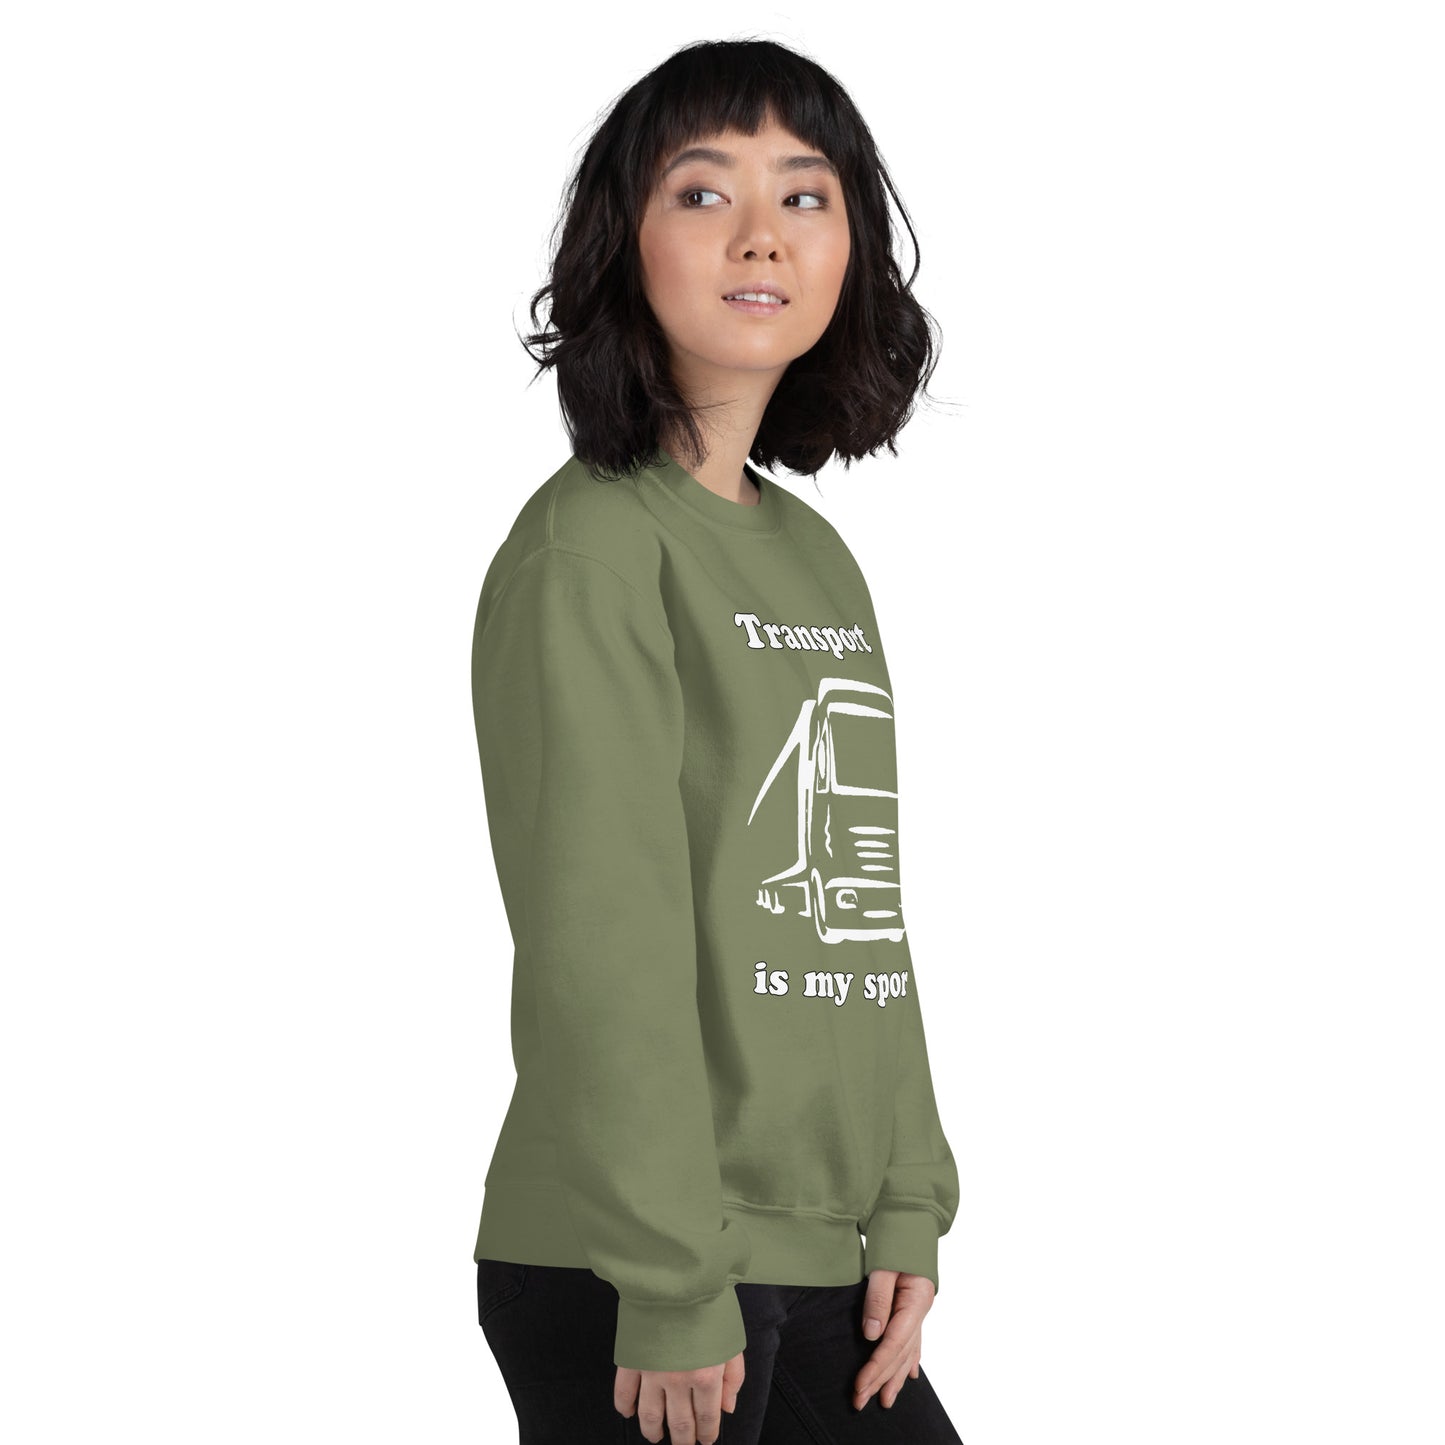 Woman with military green sweatshirt with picture of truck and text "Transport is my sport"